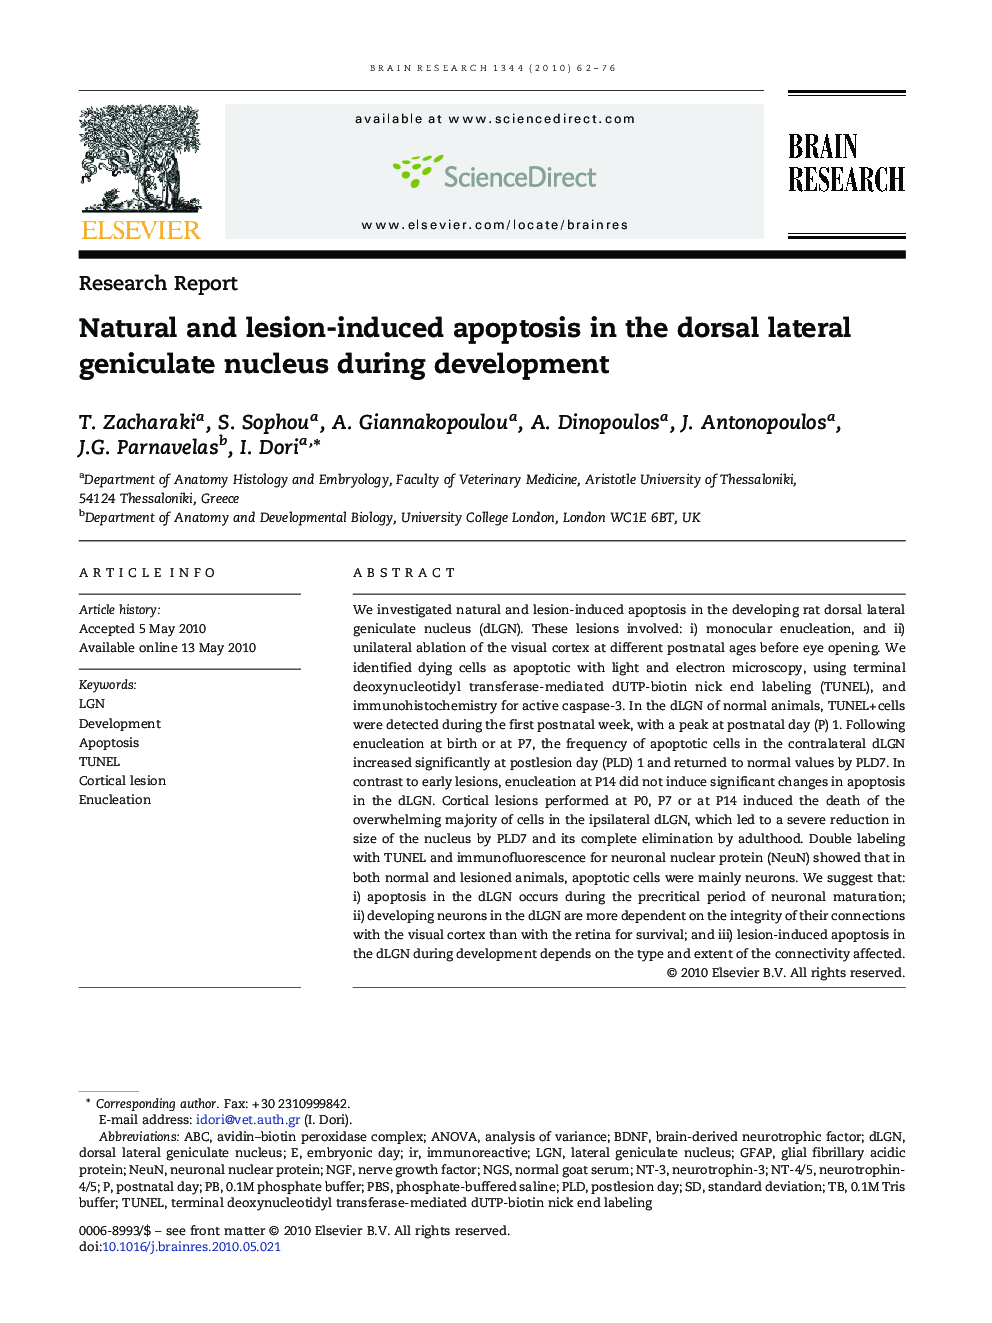 Natural and lesion-induced apoptosis in the dorsal lateral geniculate nucleus during development